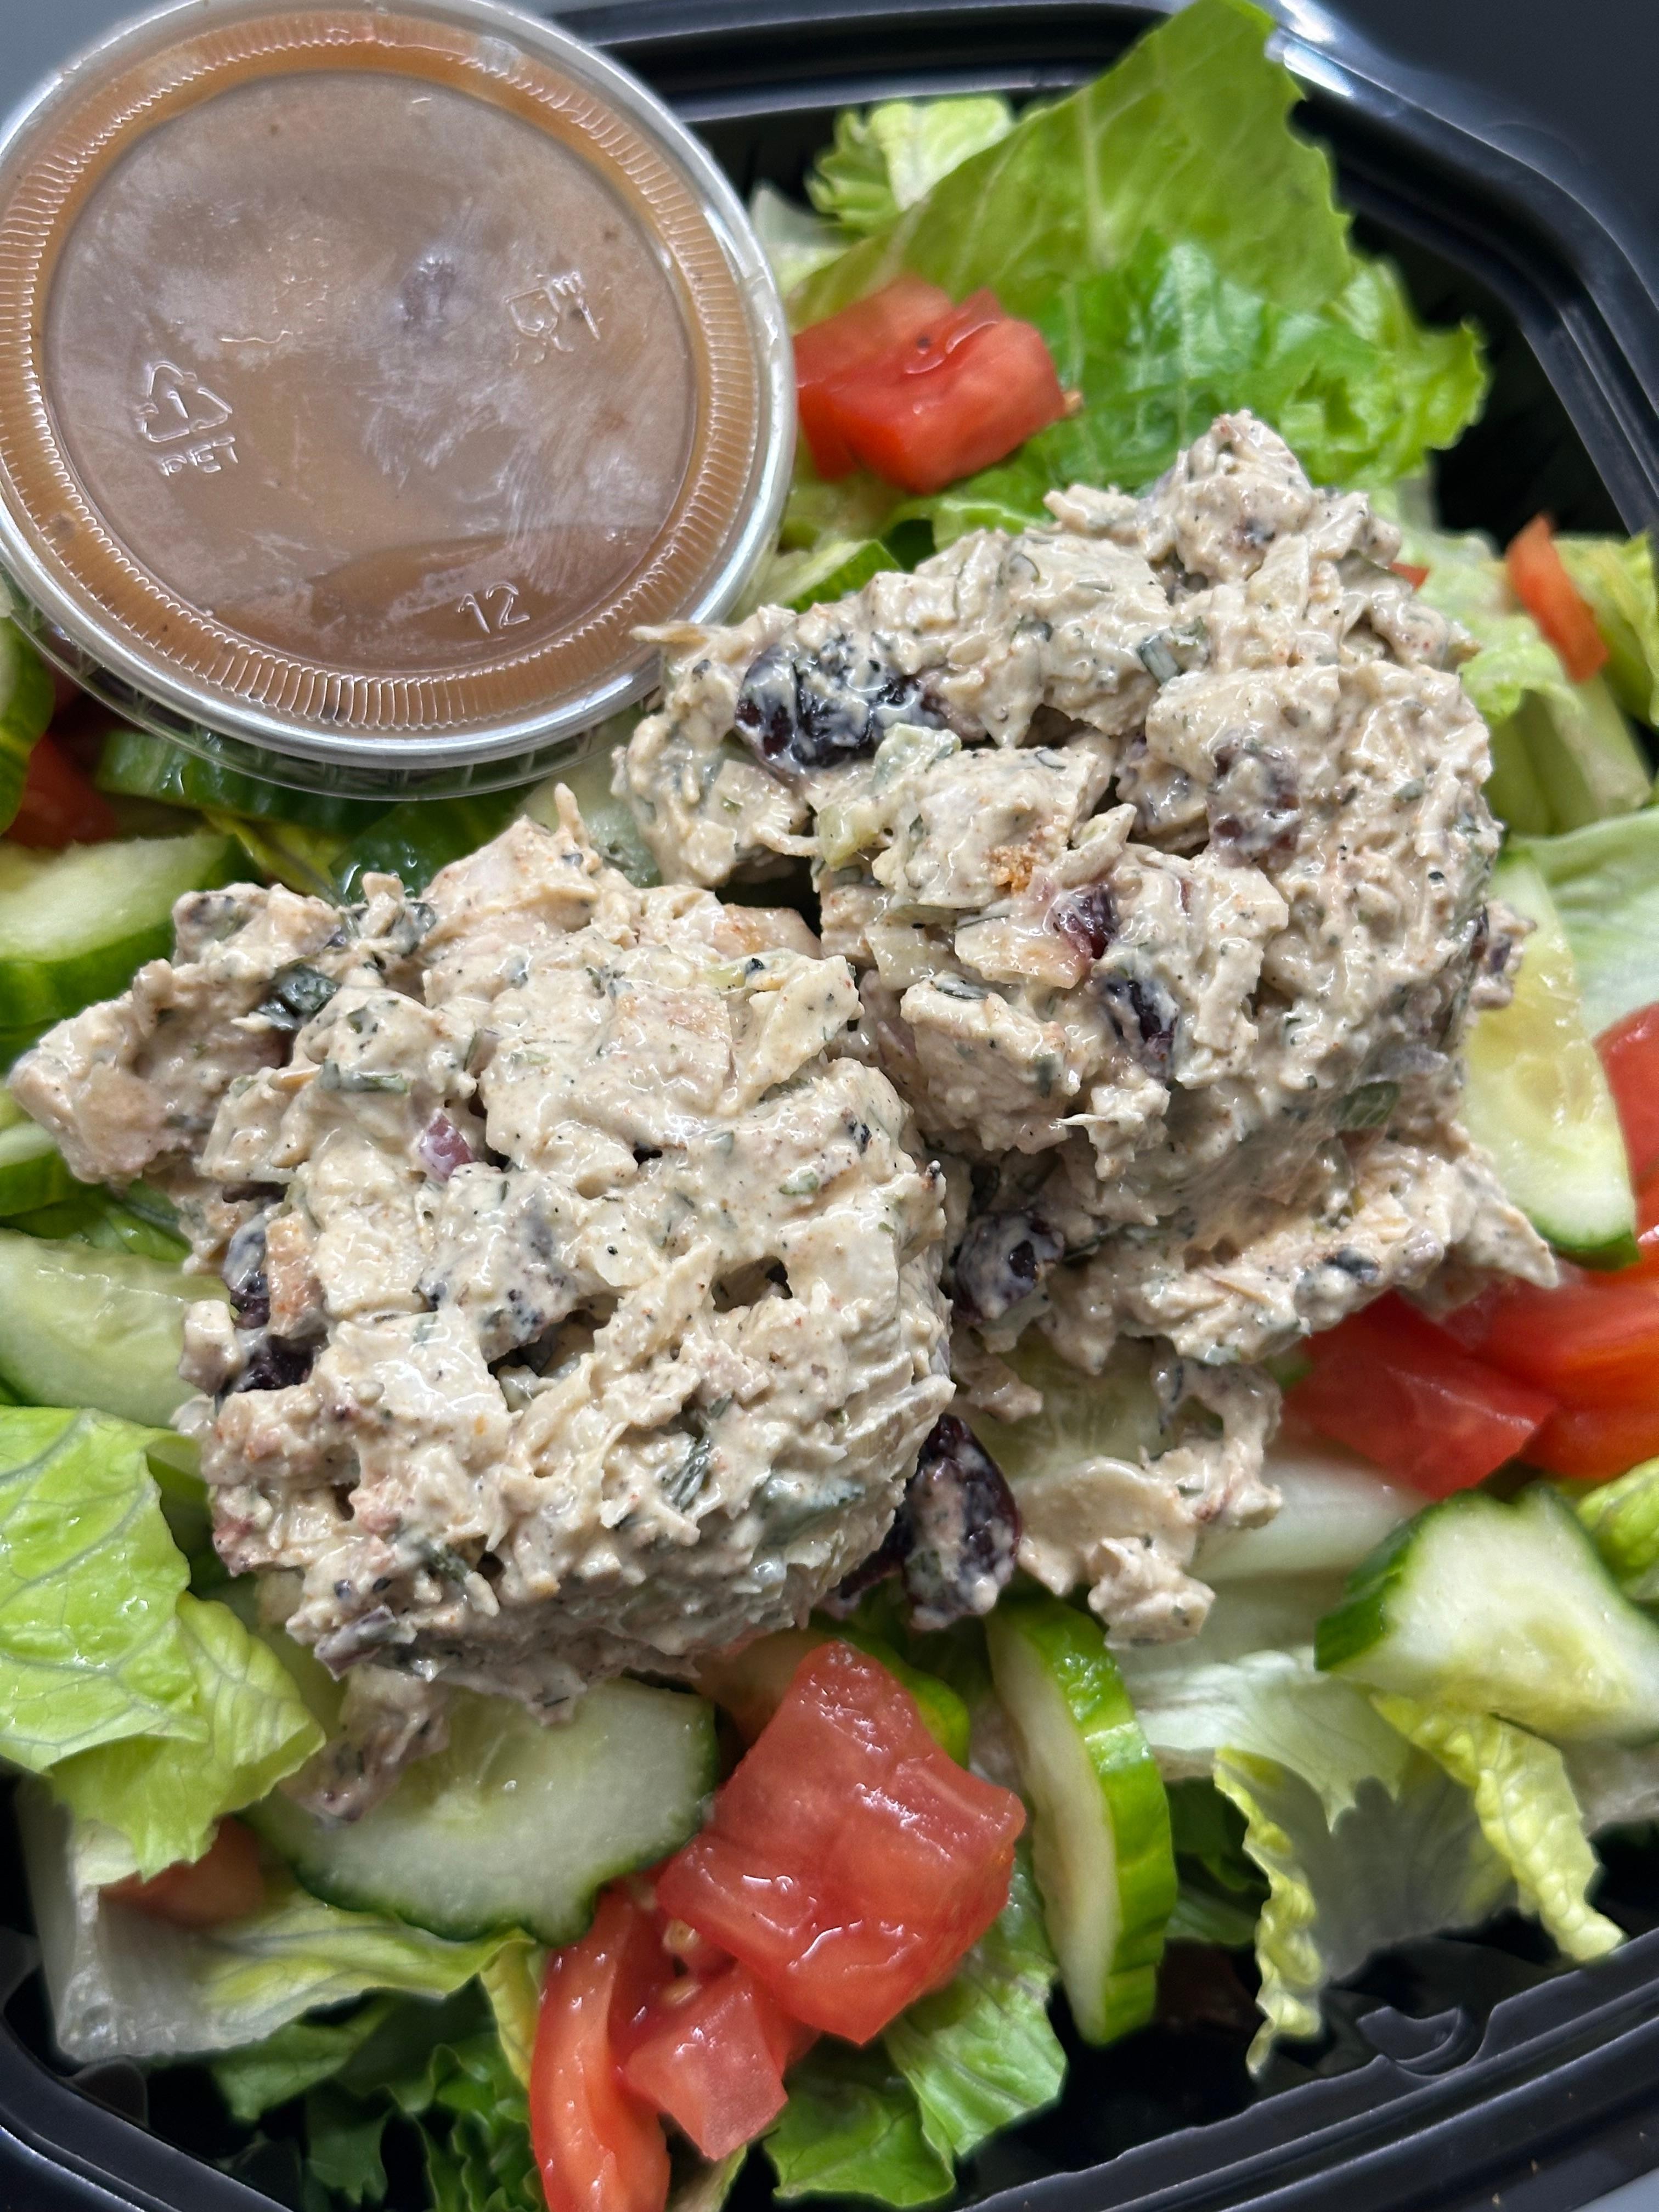 SALAD - CHICKEN SALAD (romaine, tomato, cucumbers, and 2 scoops of chicken salad made with almonds, onions and cranberries)